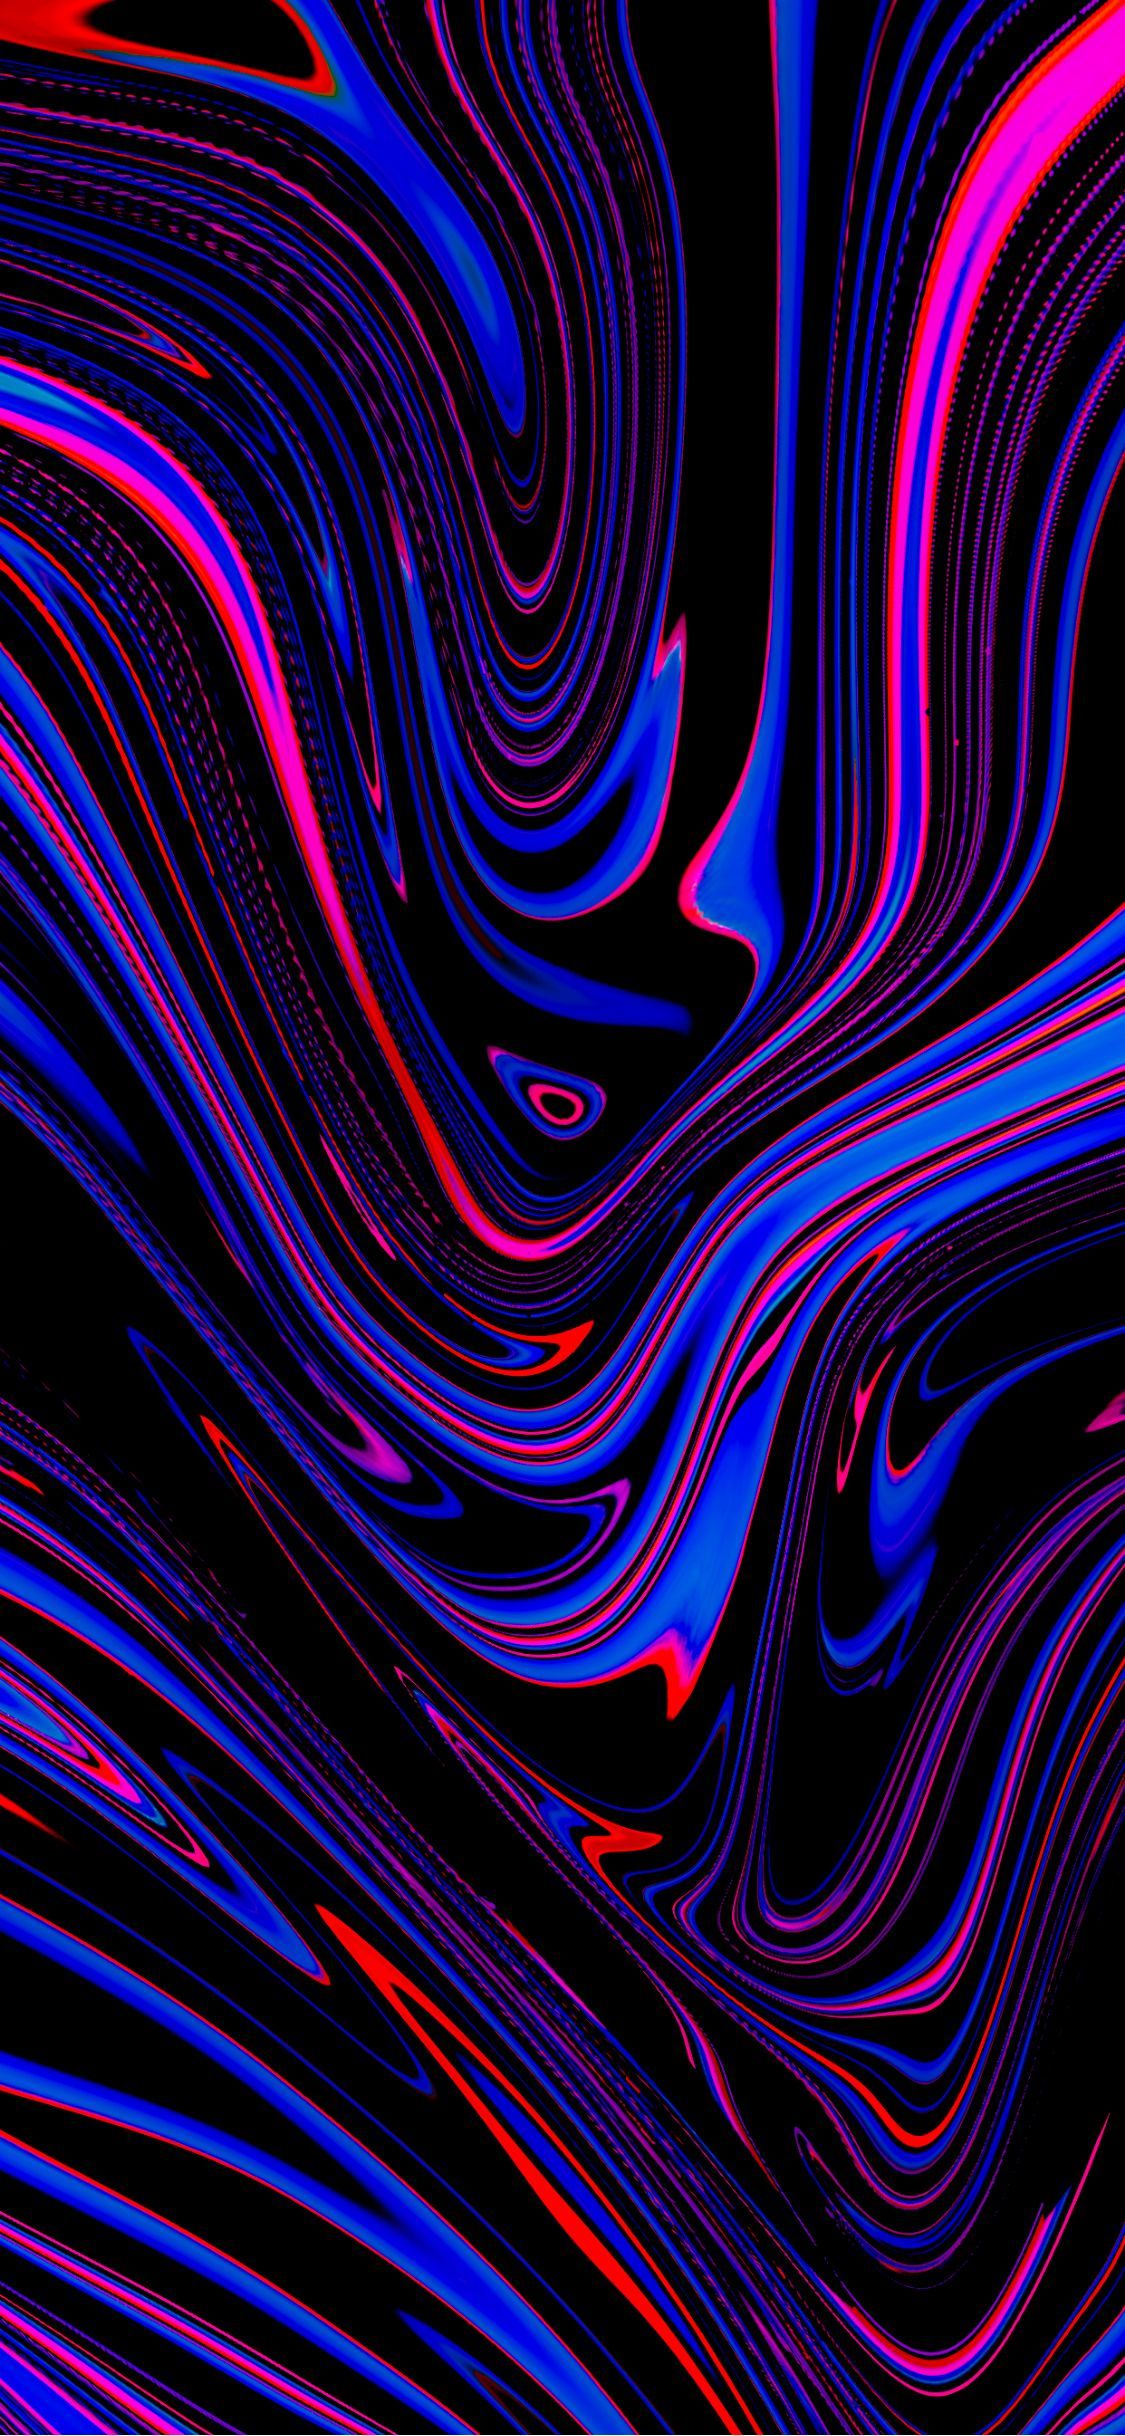 Pro Display Xdr Wallpapers